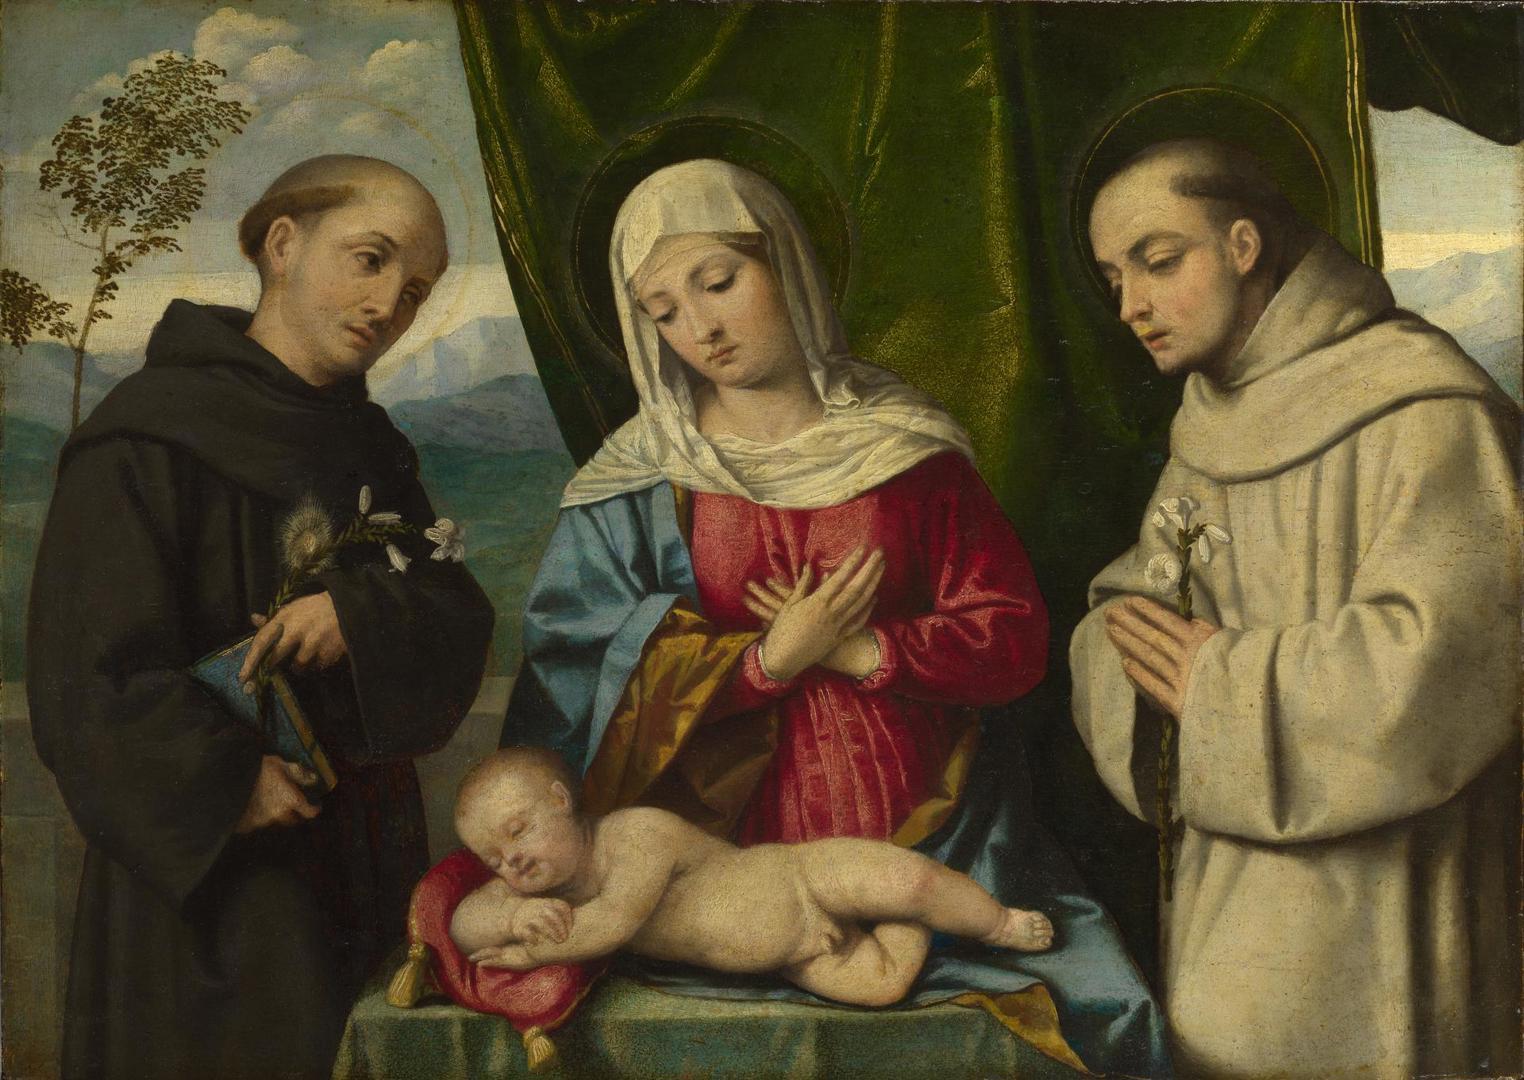 The Madonna and Child with Saints by Italian, North